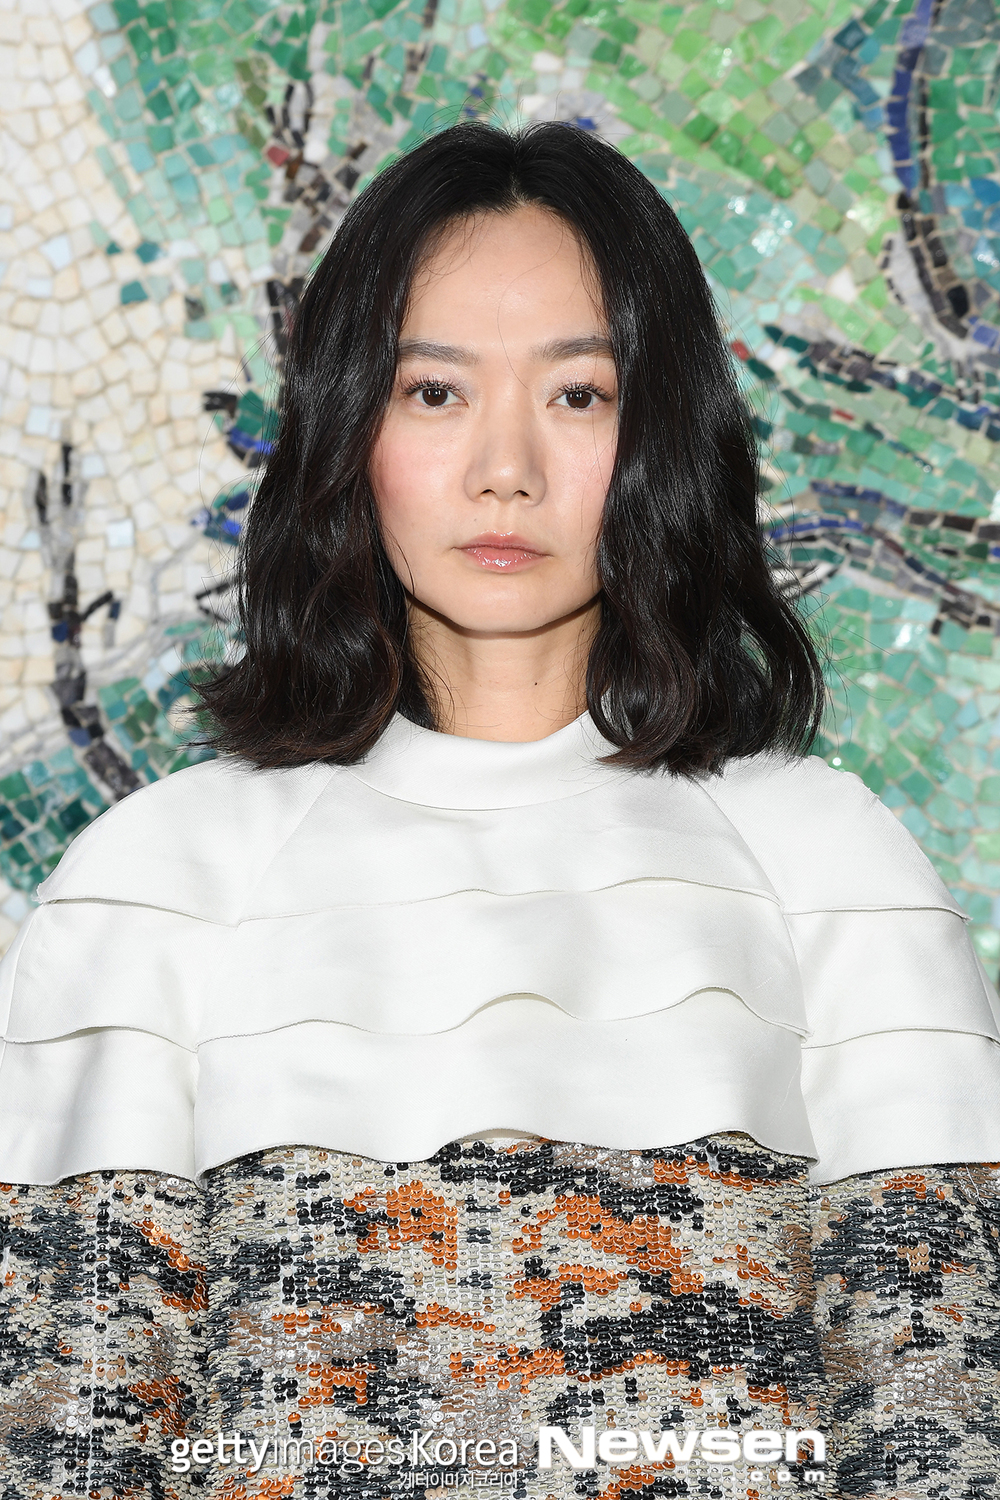 Louis Vuitton 2019 Cruise Collection was held in France on May 28 (local time).On the day, Bae Doona is attending and posing.Meanwhile, Bae Doona is scheduled to appear in Netflix original drama Sense 8 Season 3.kim hye-jin